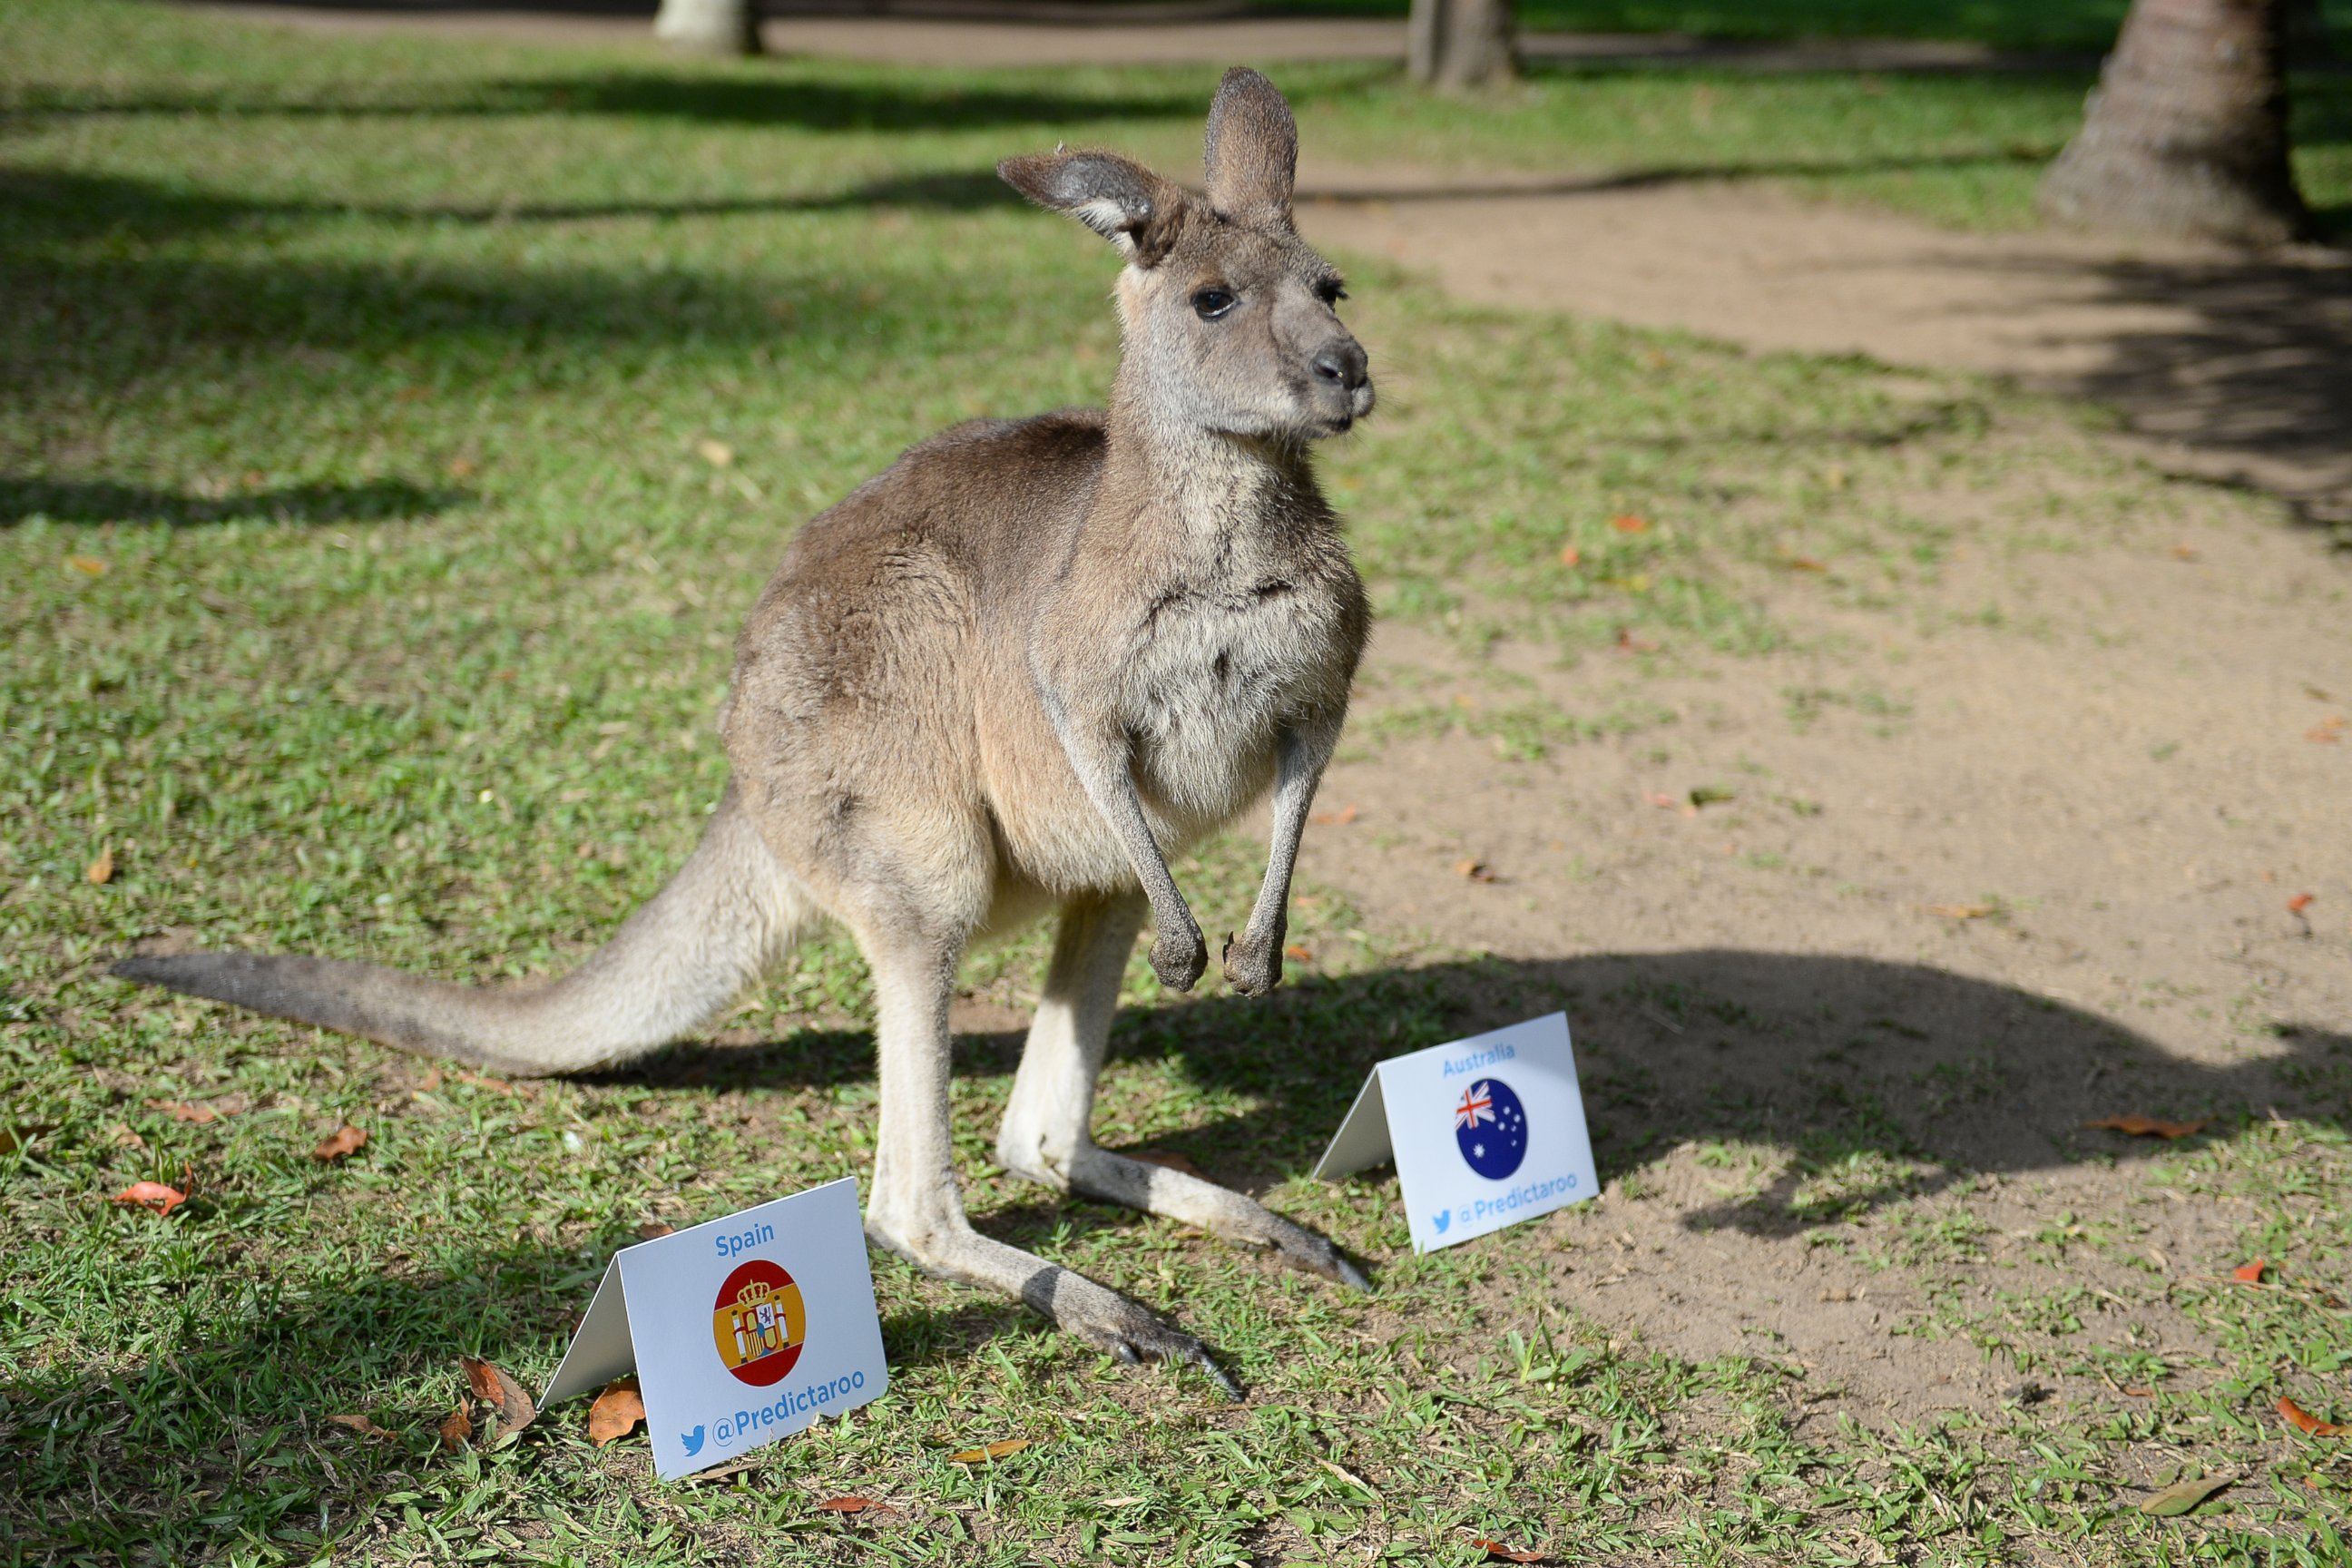 PHOTO: Flopsy the kangaroo from Australia Zoo is making predictions for the 2014 World Cup.